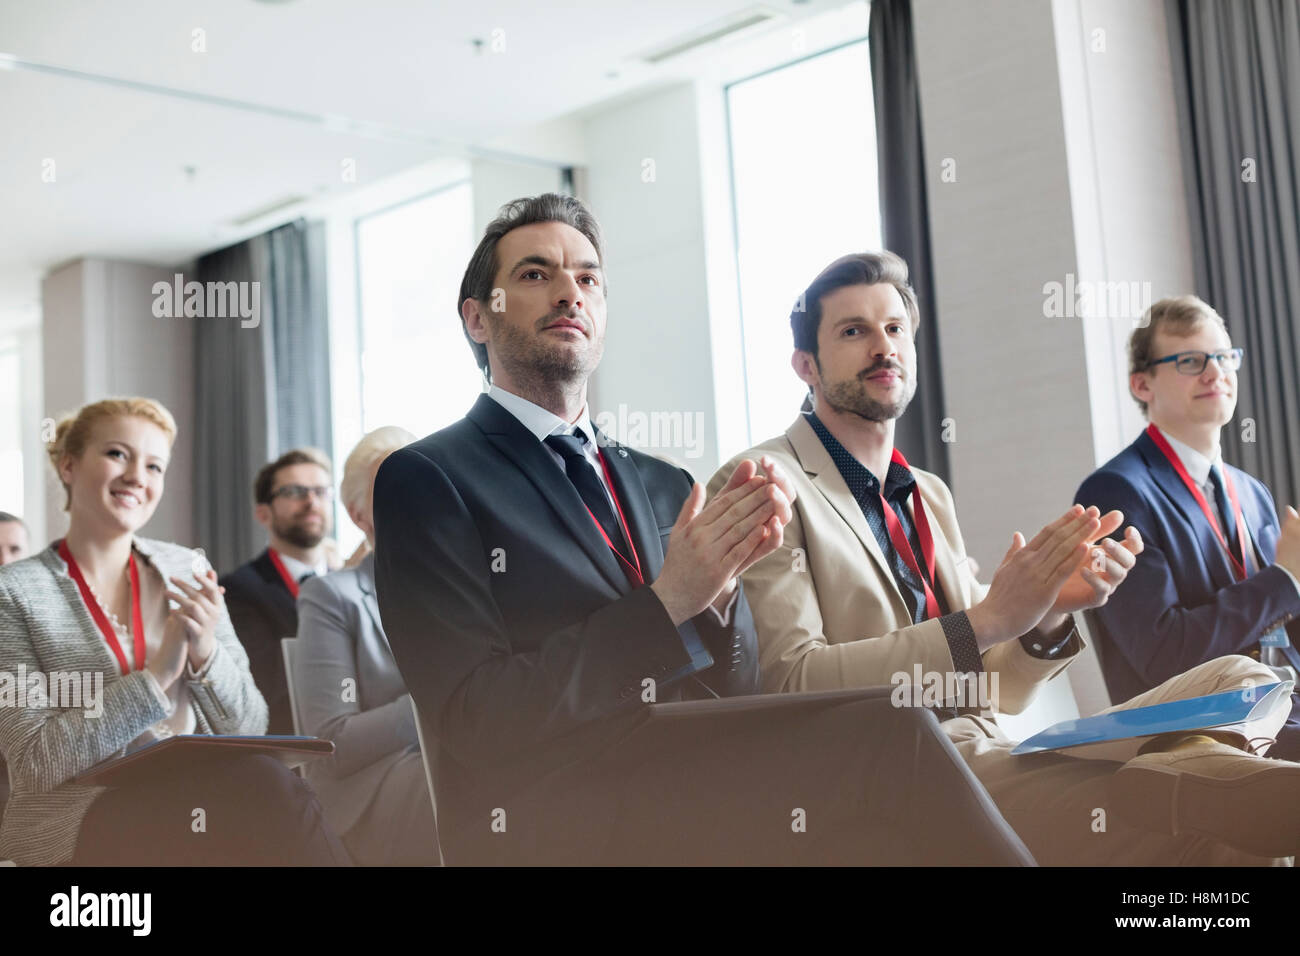 Business people applauding during seminar Stock Photo